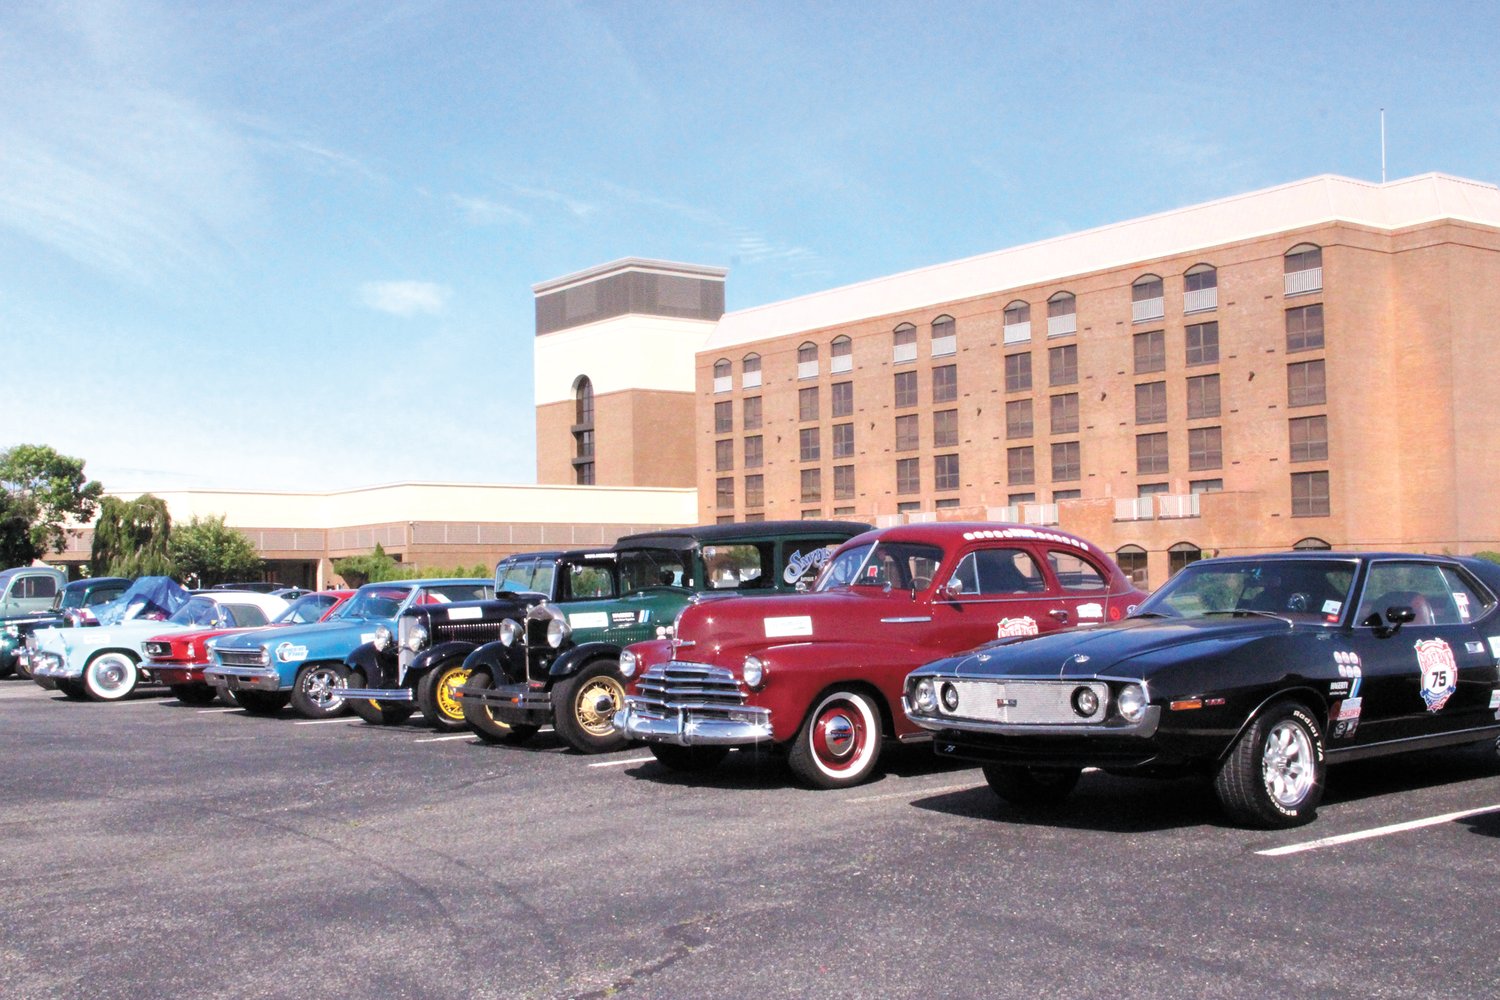 LINING UP: Entries in the Great Race started arriving earlier this week at the Crowne Plaza in Warwick.